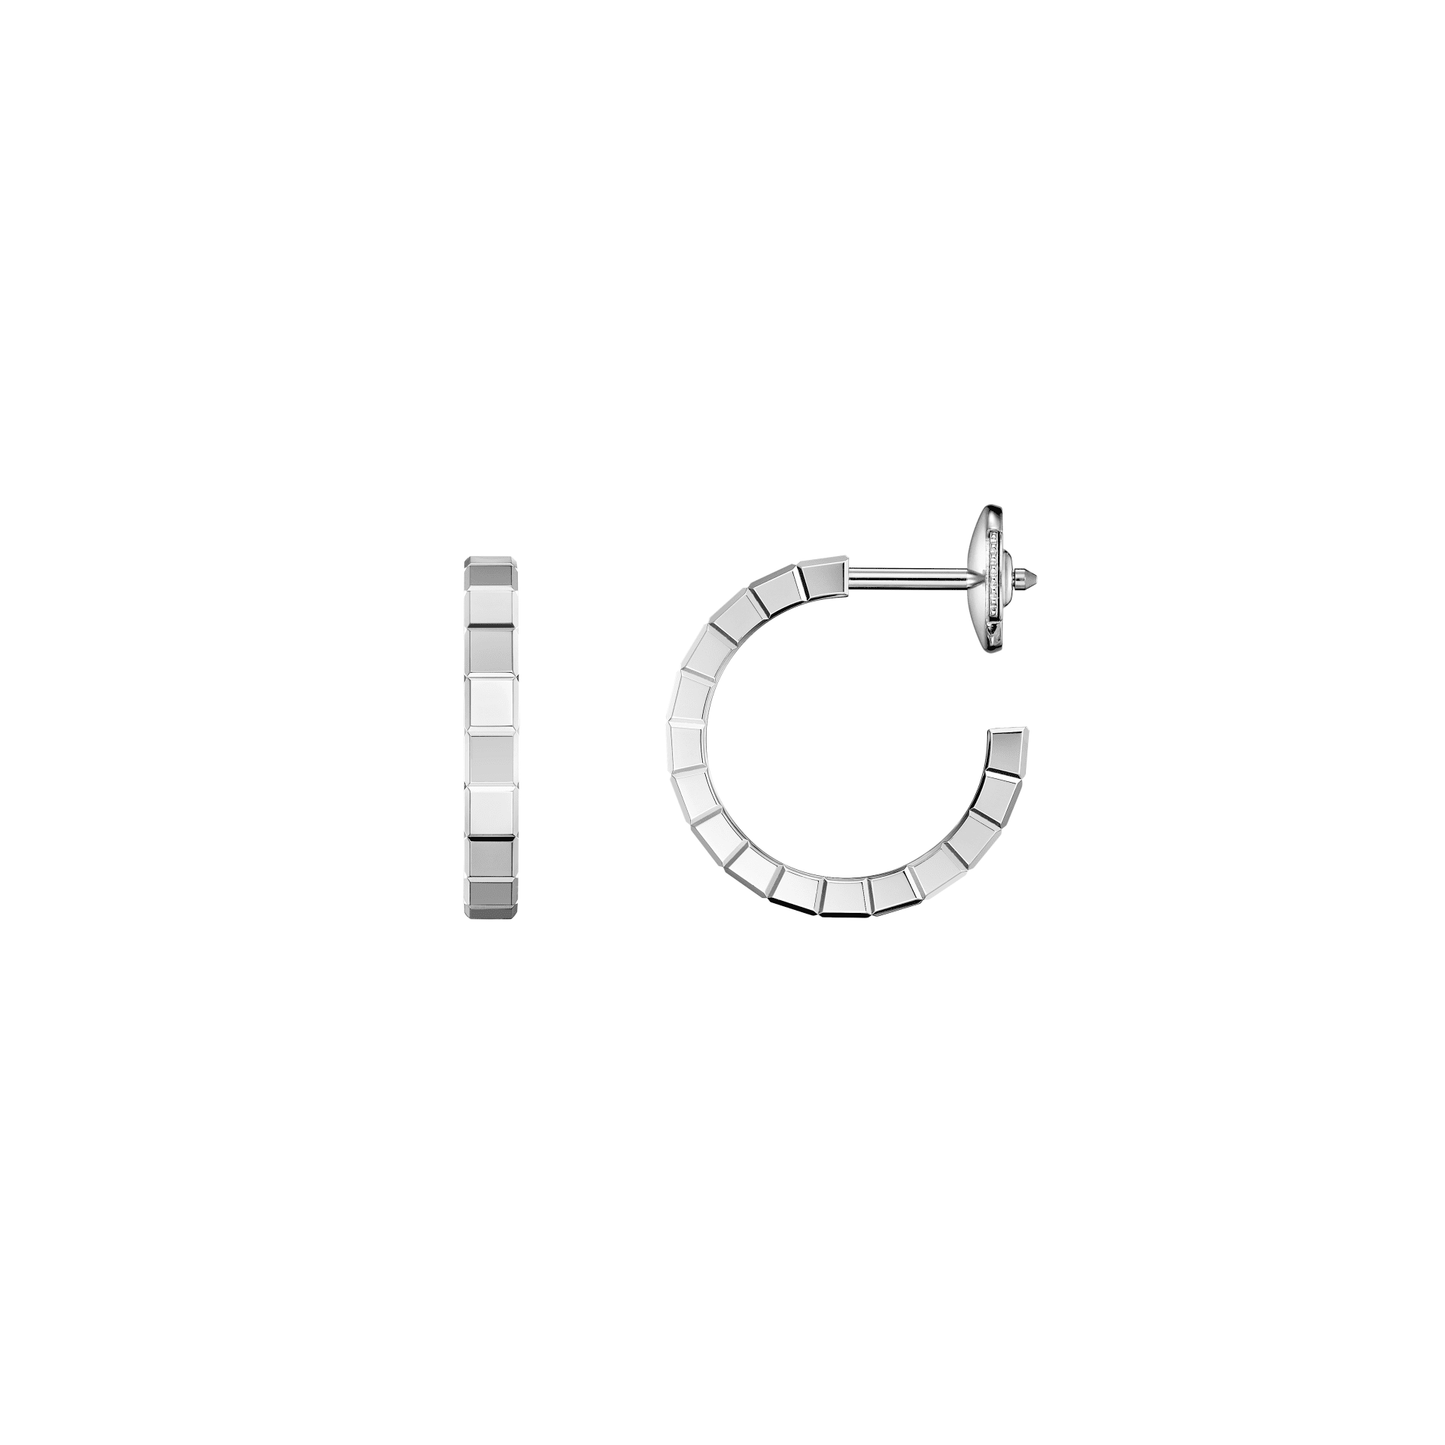 ICE CUBE EARRINGS, ETHICAL WHITE GOLD 837702-1006